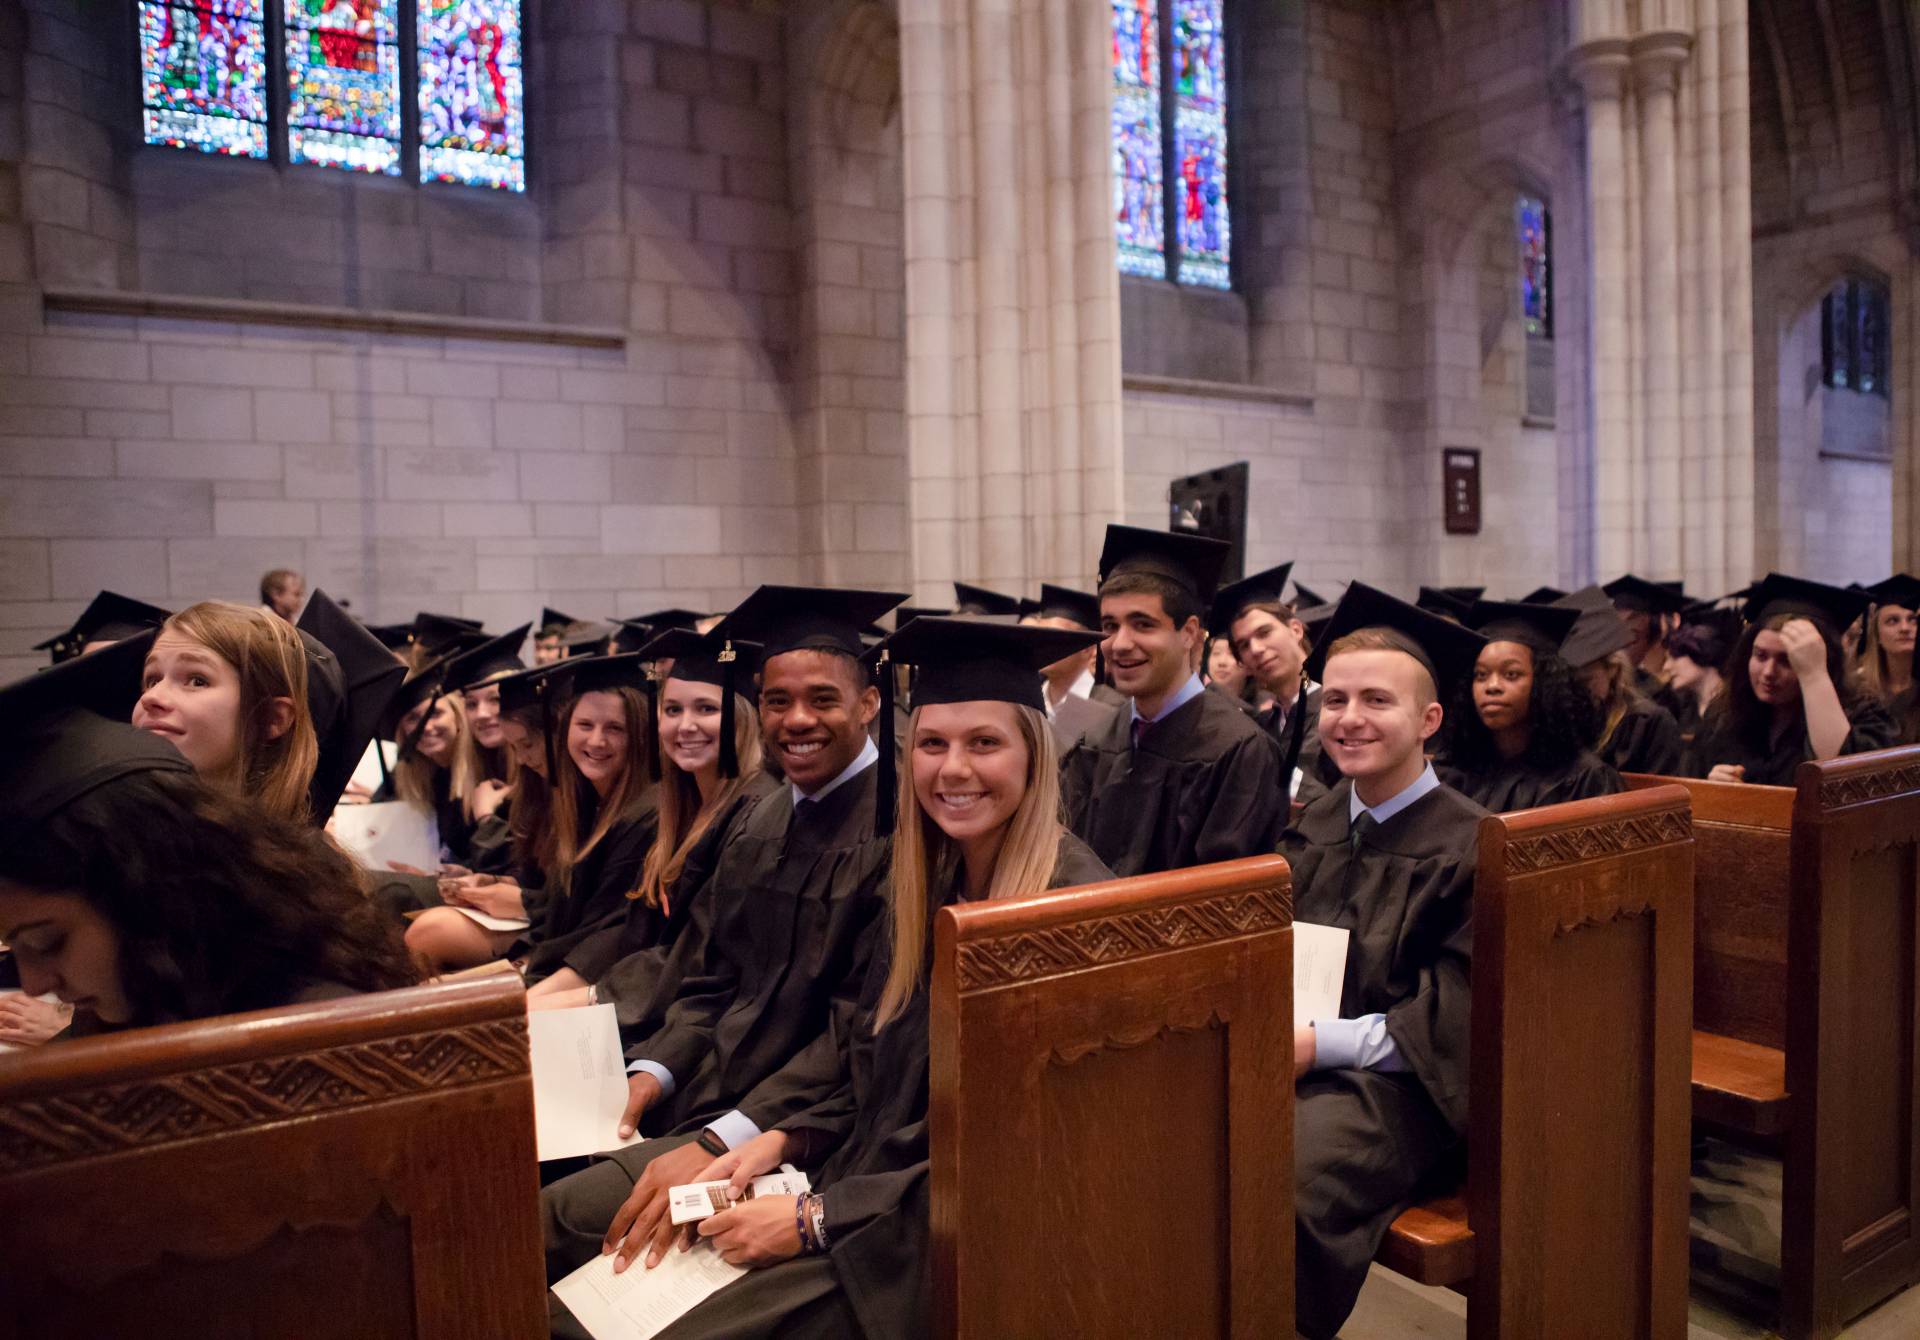 Students in chapel during Baccalaureate ceremony